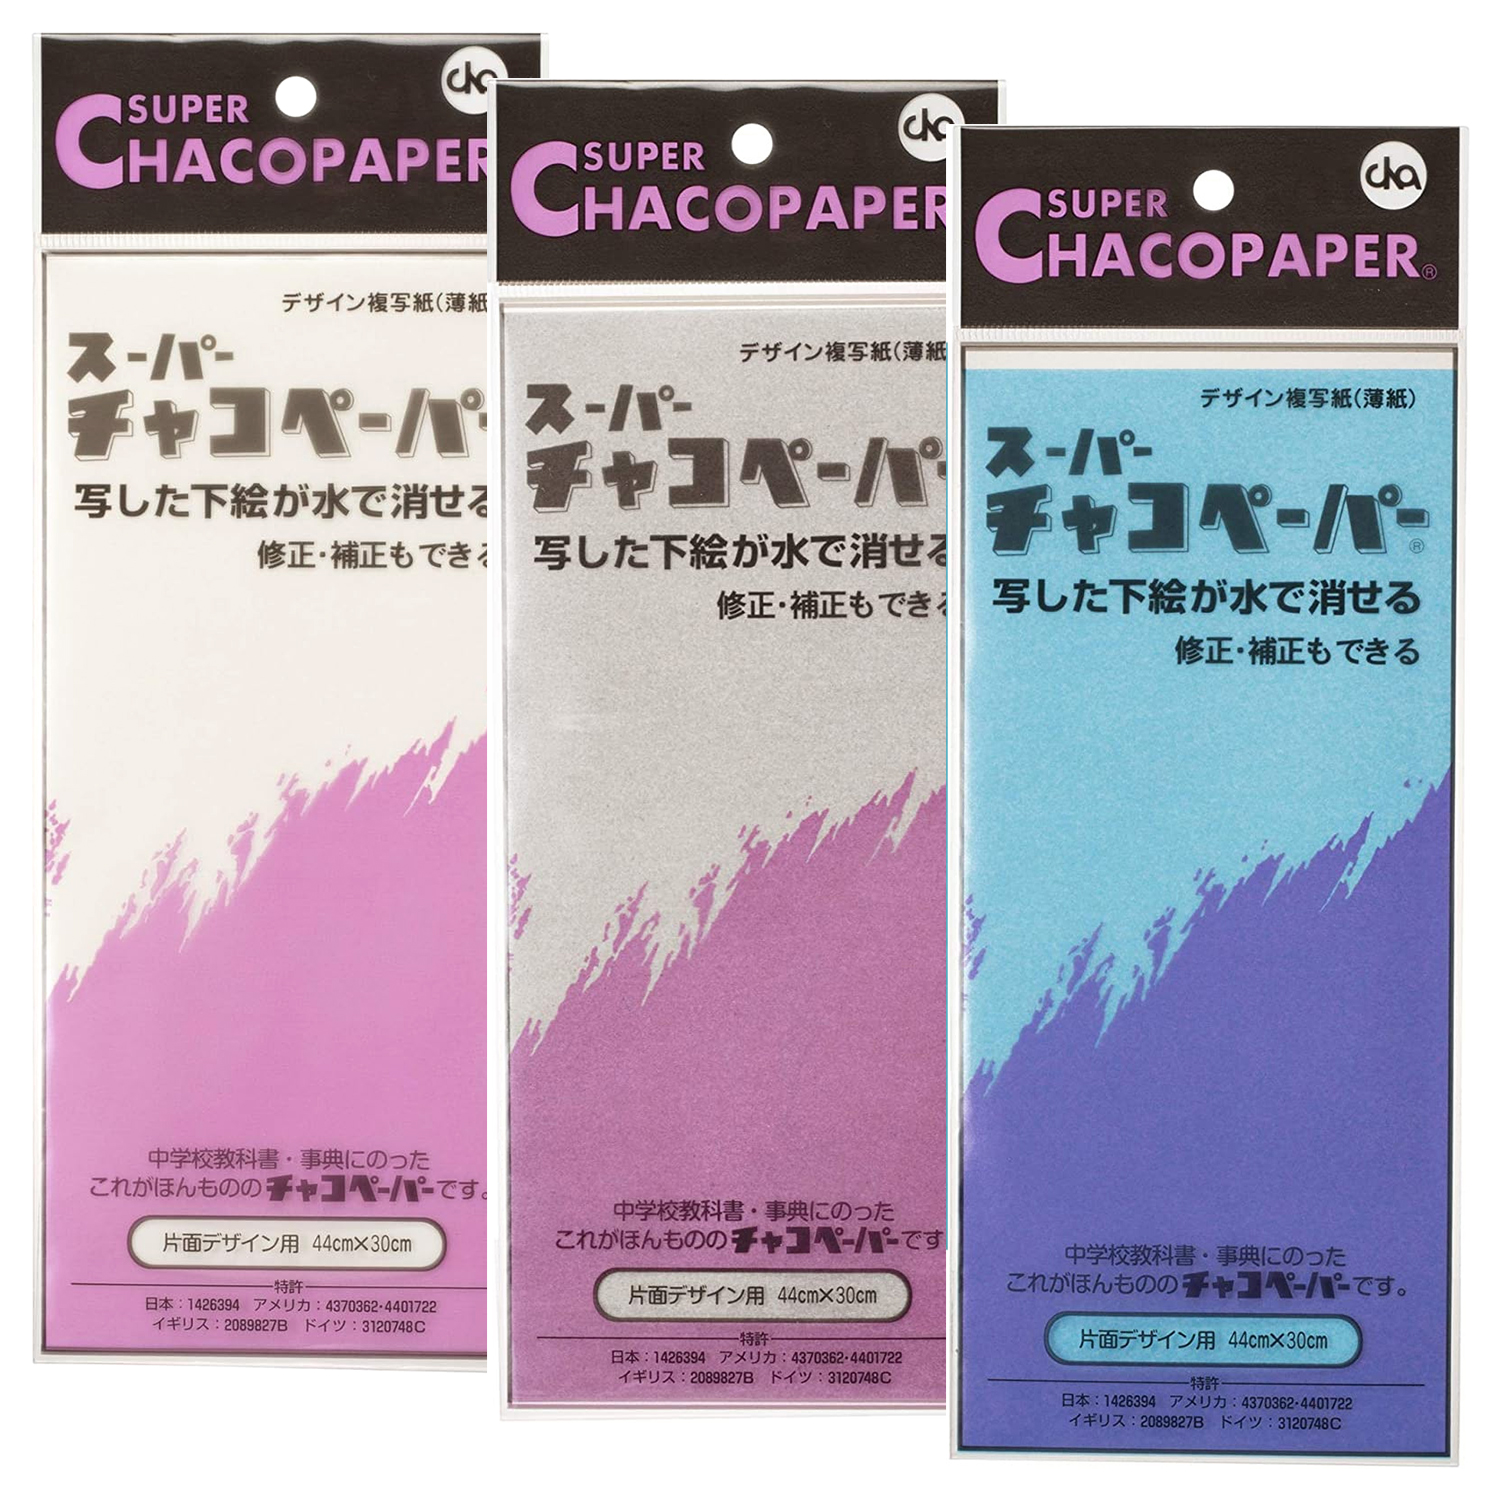 CY-E3 Super Design Chaco Paper one-sided (pcs)